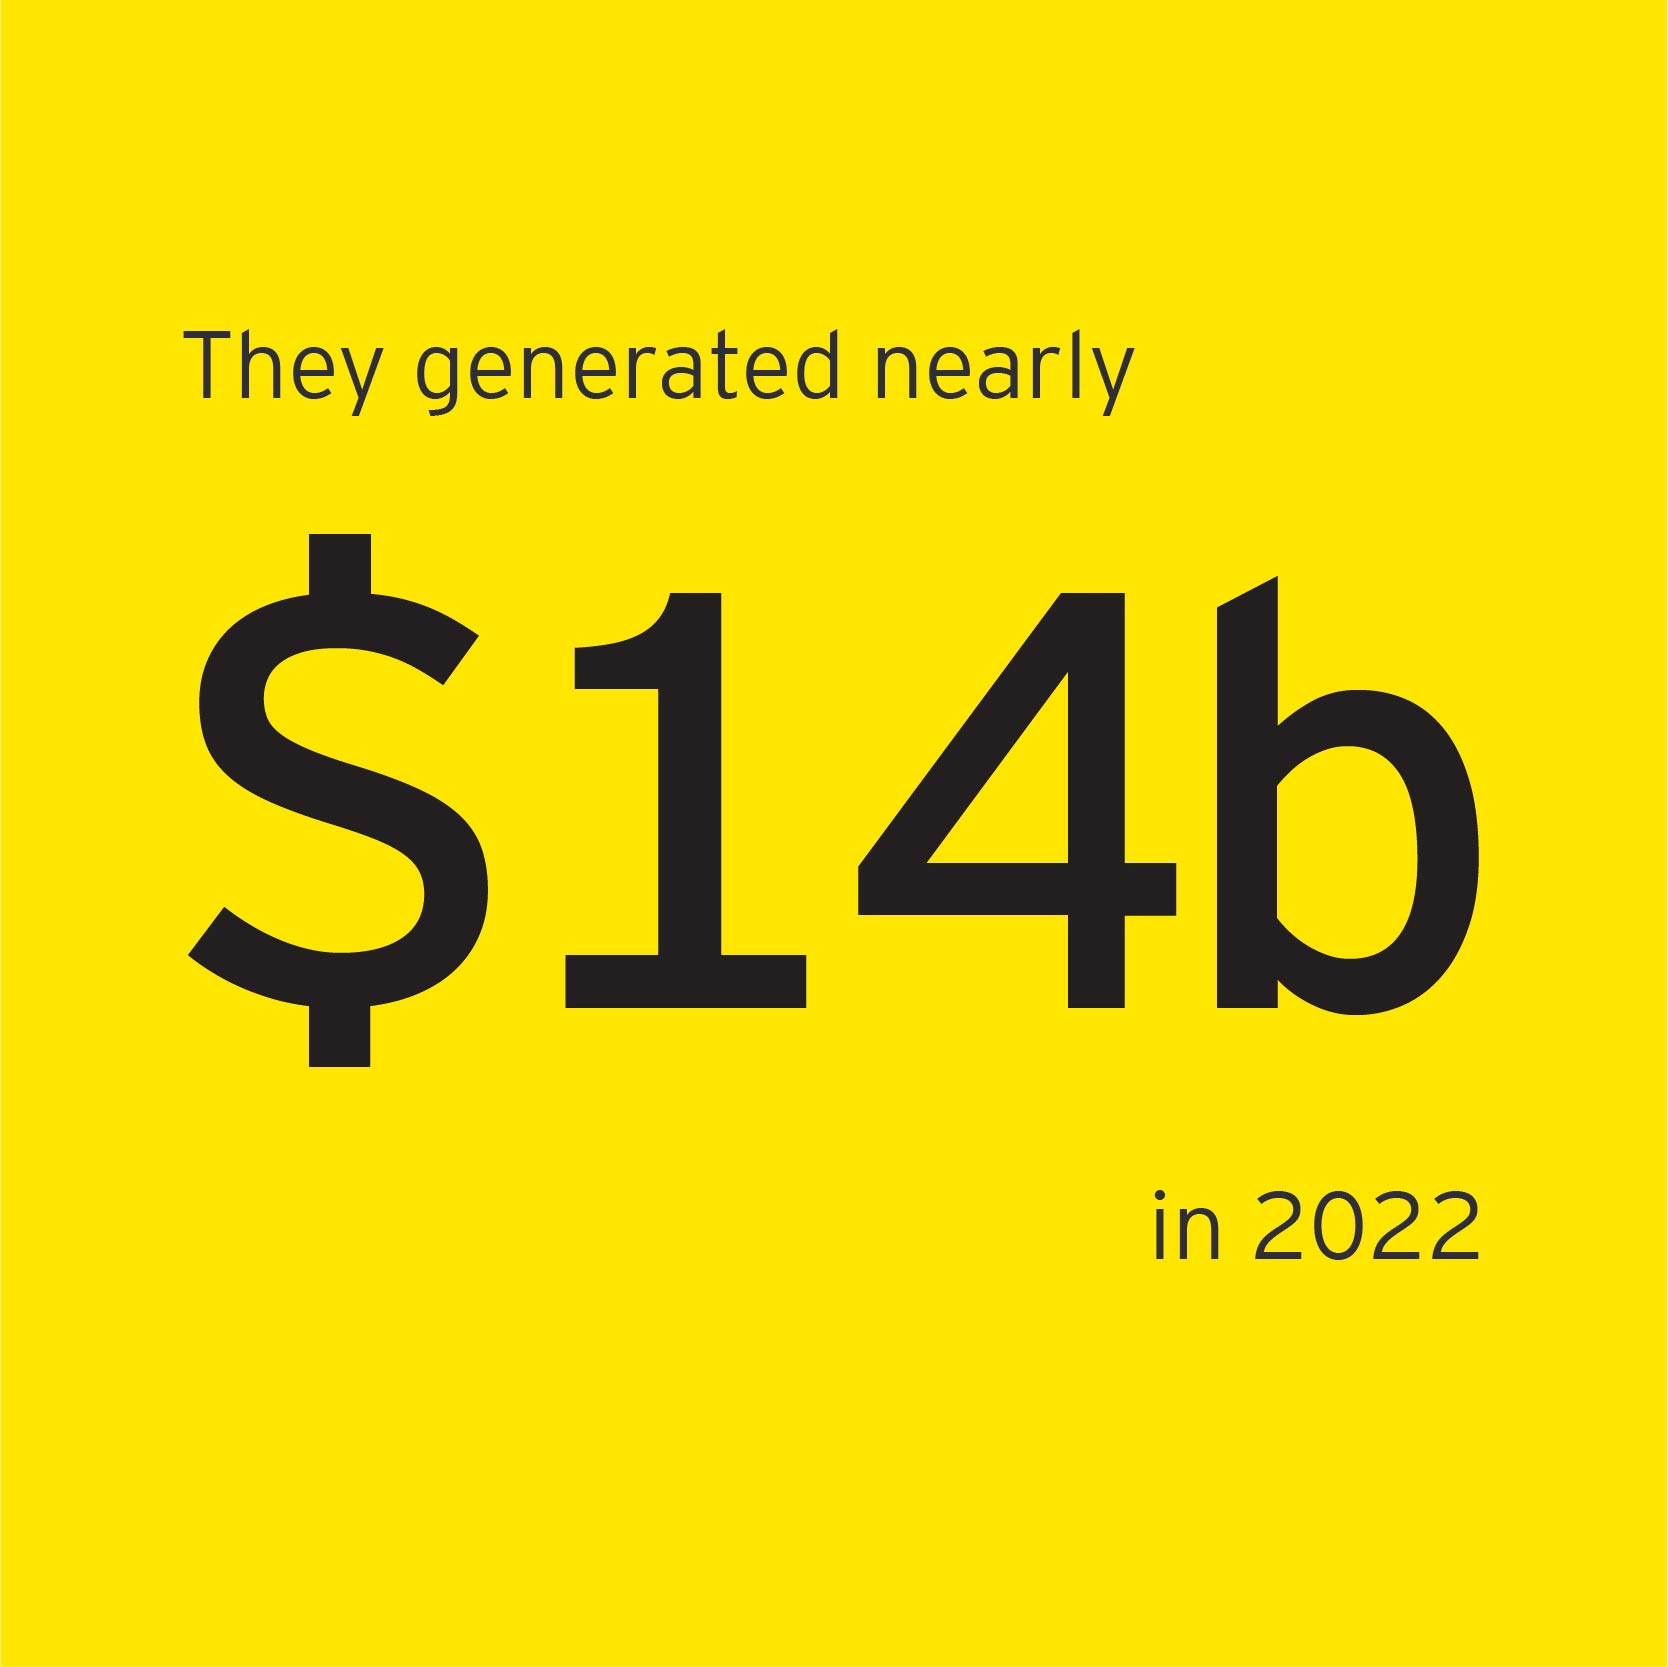 Nearly $4.1b in revenue generated by EOY New York finalists in 2022